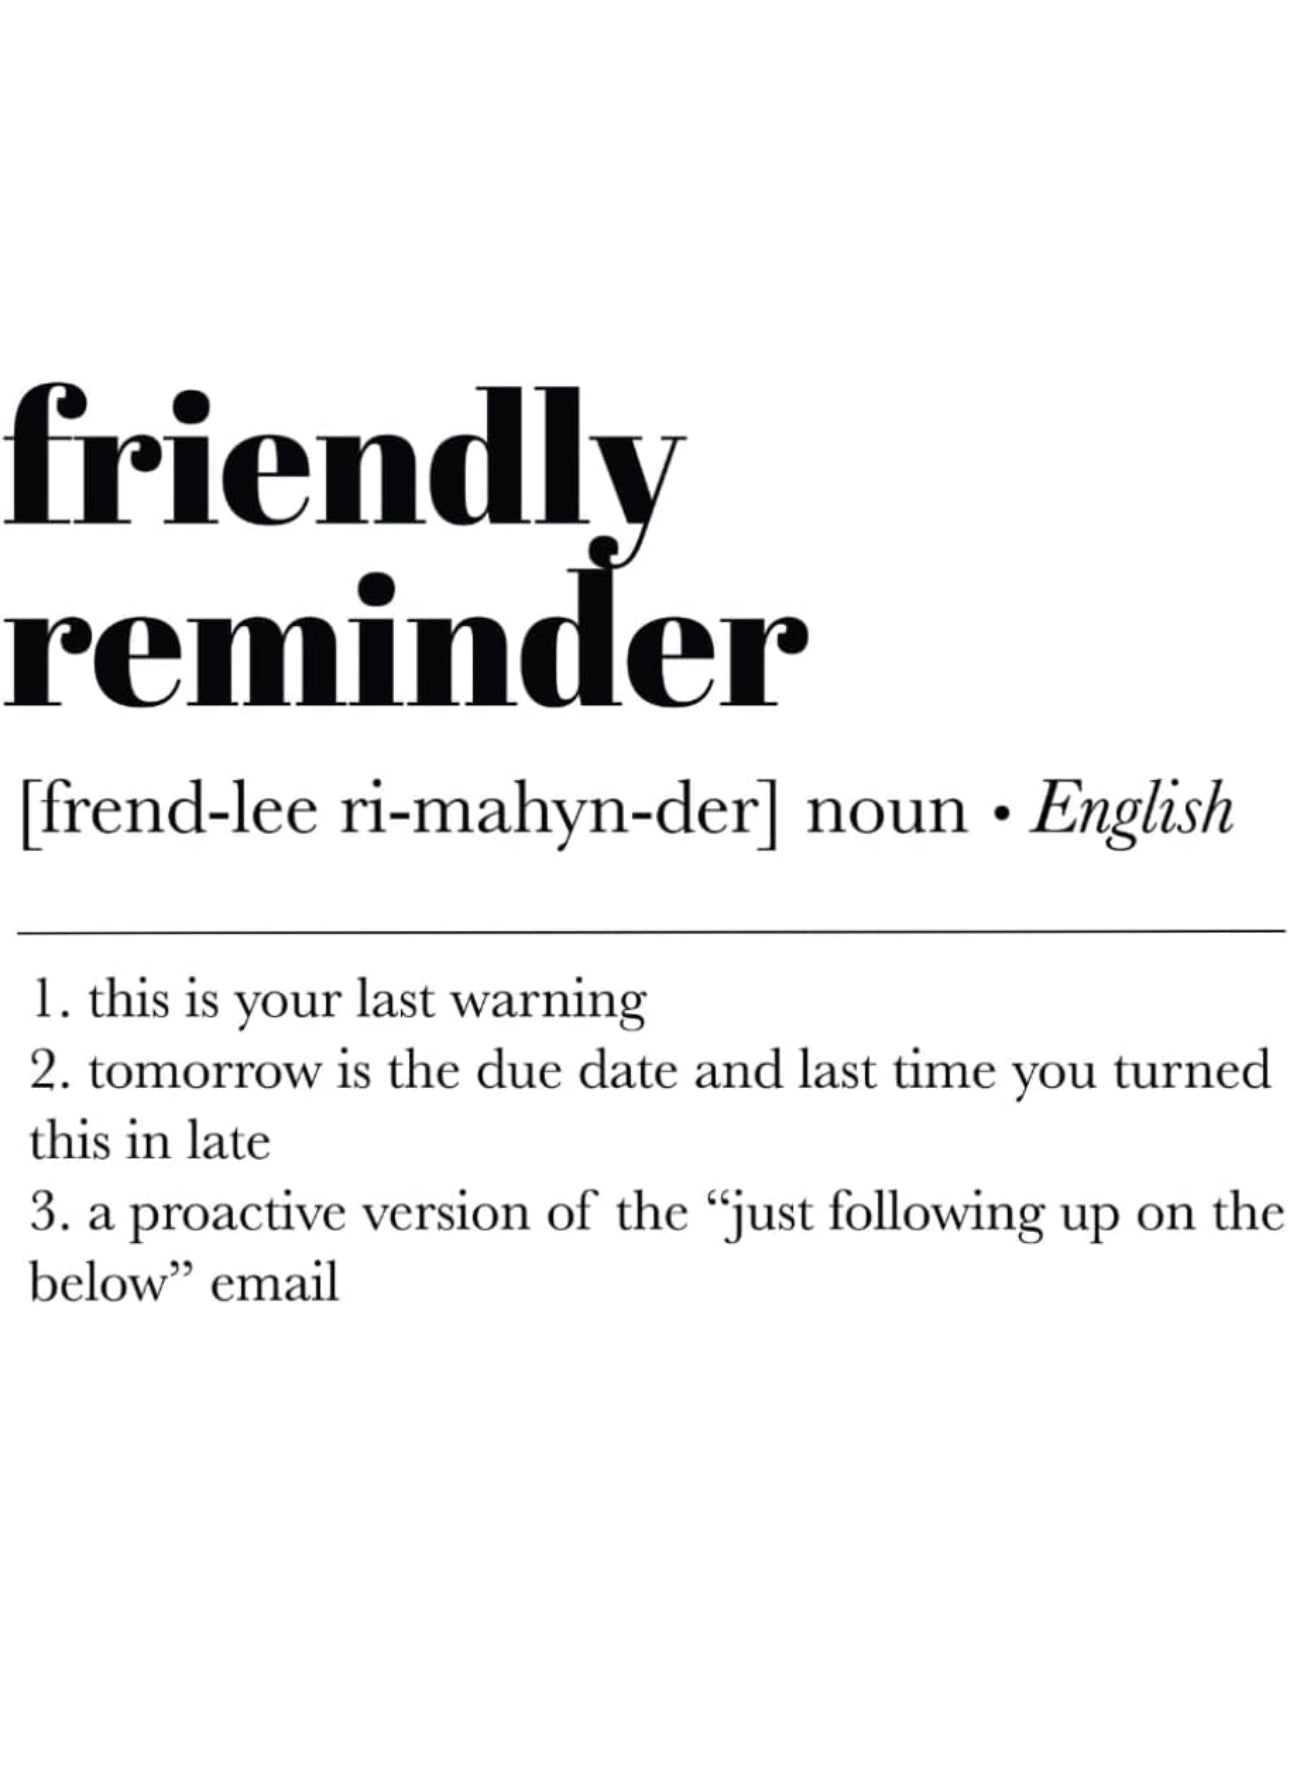 Friendly Reminder Funny Office Journal Notebook